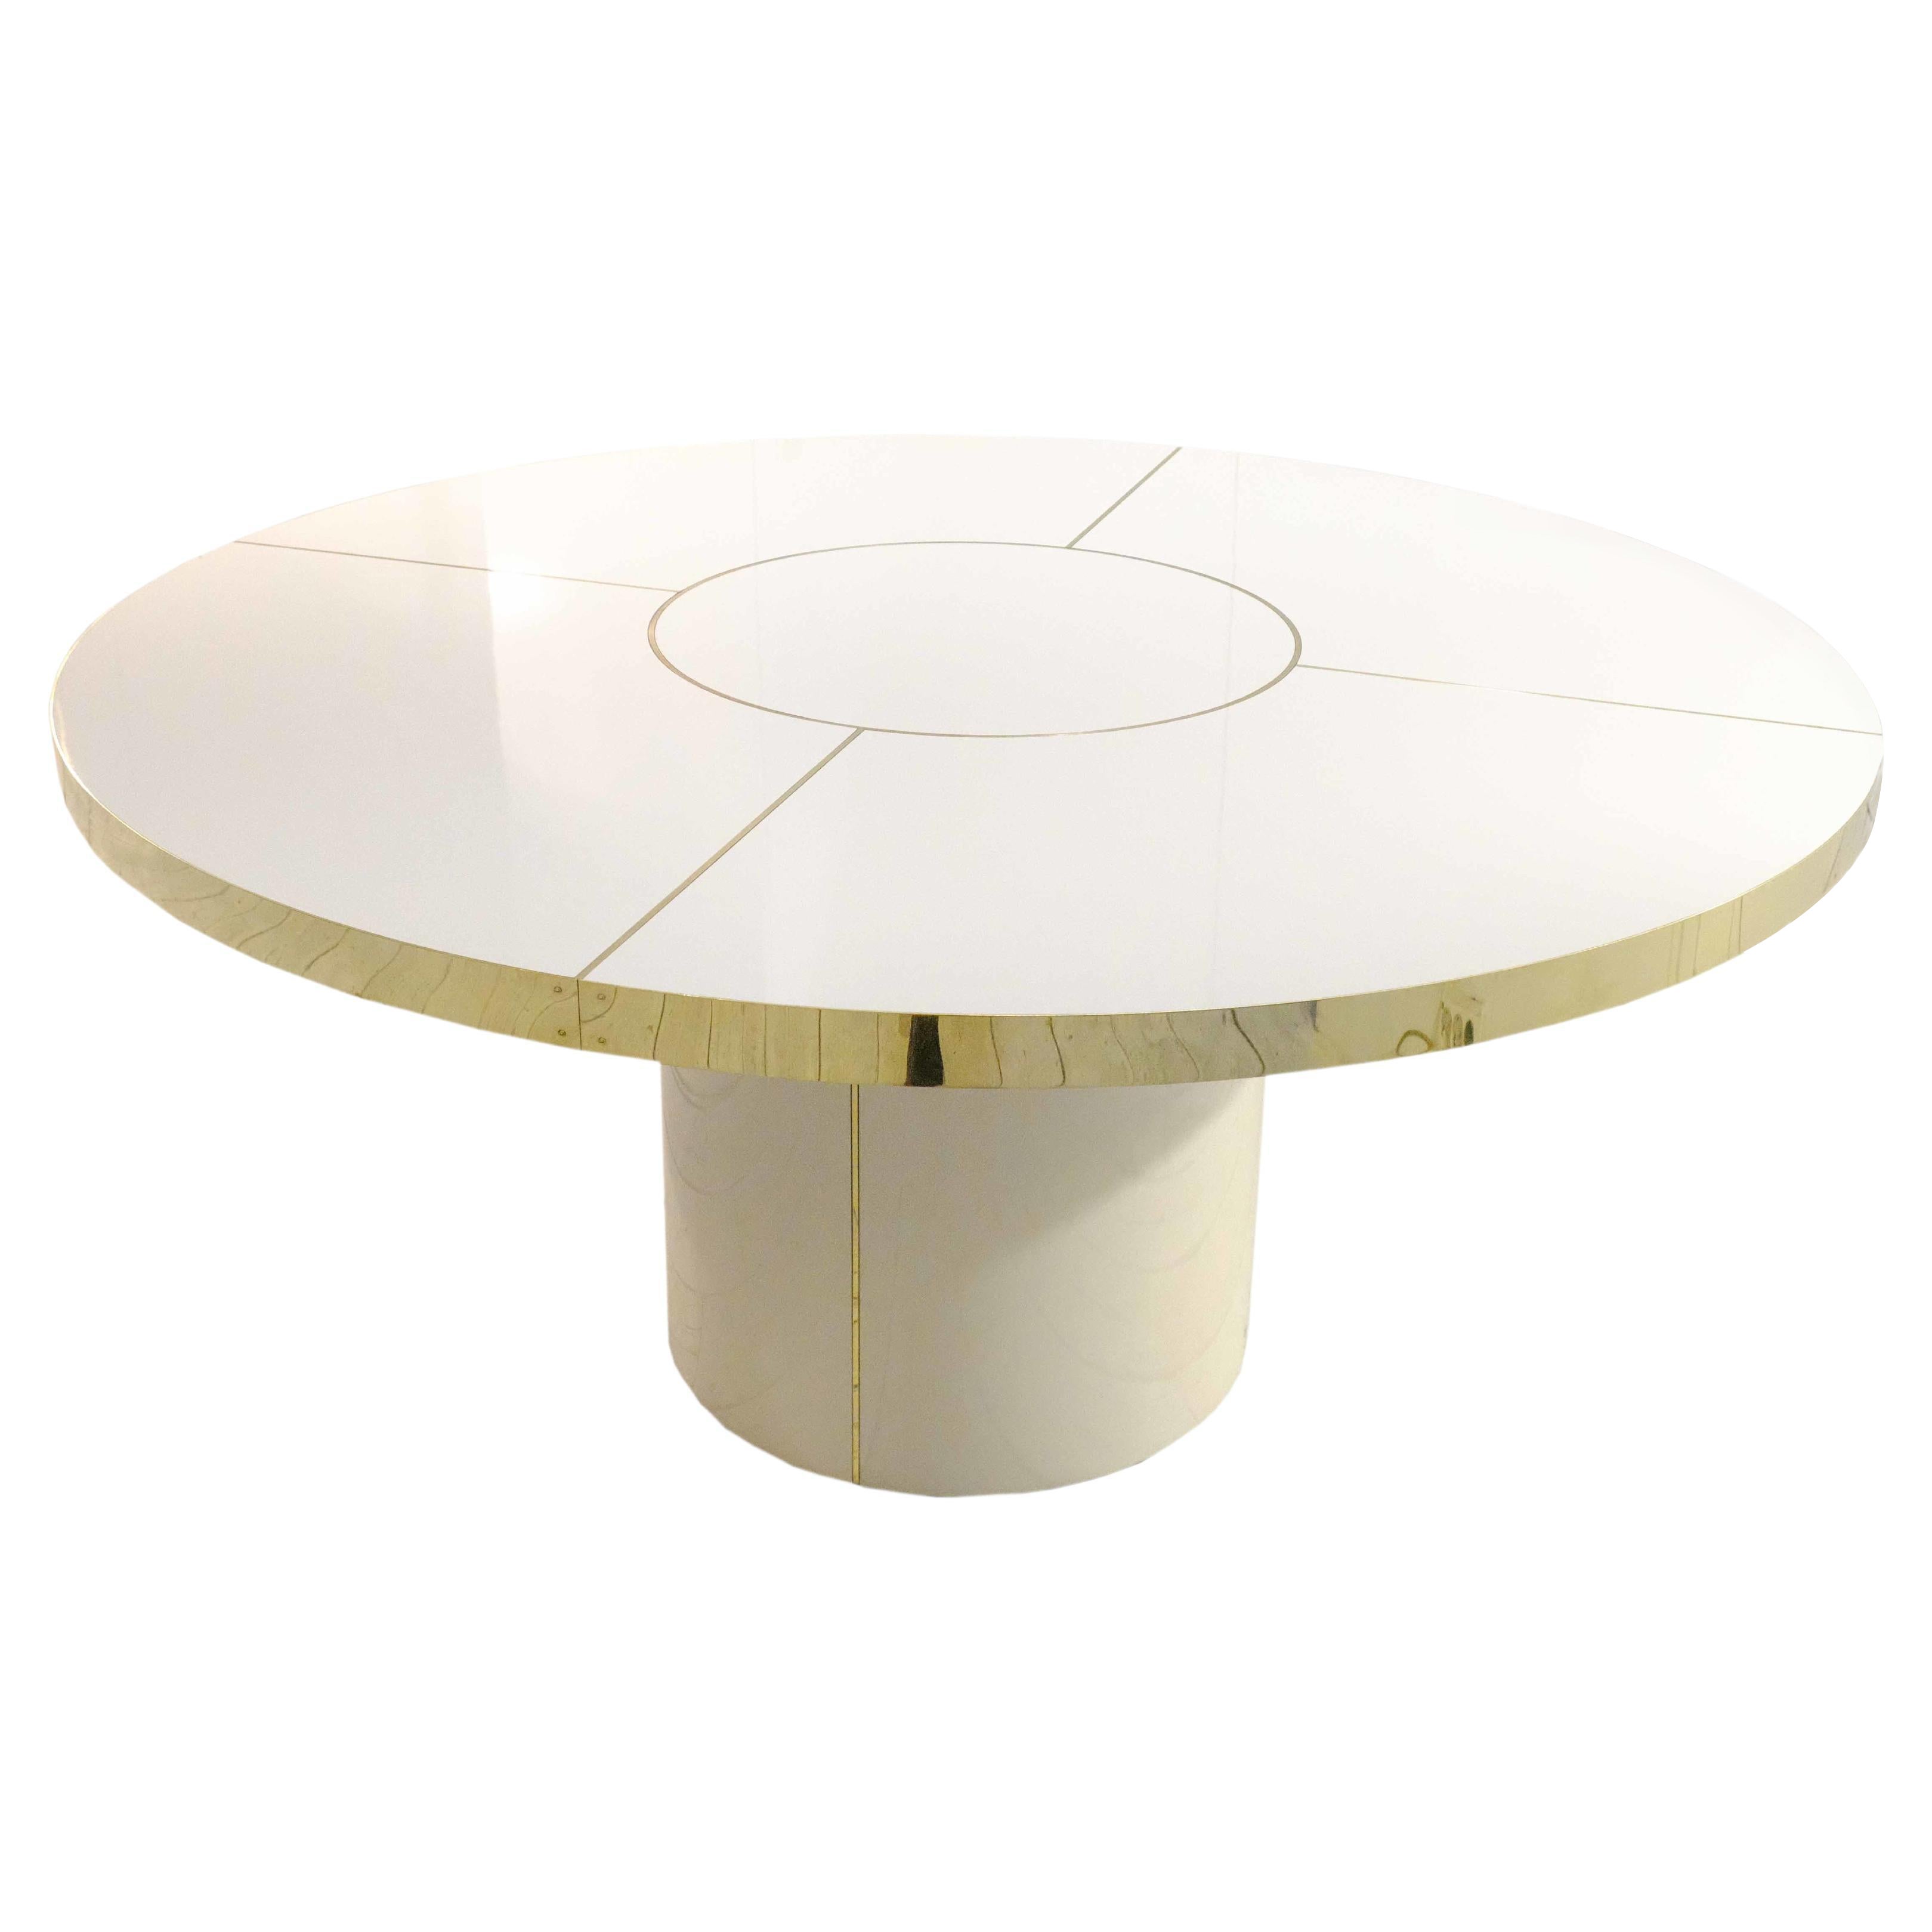 Retro Design Round Dining Table Palm Springs Style High Gloss Laminated & Brass Details and with contrasting Navy - Night Sea pedestal Leg -  L Size

Discover our incredible collection of retro-style design tables inspired by the iconic decoration